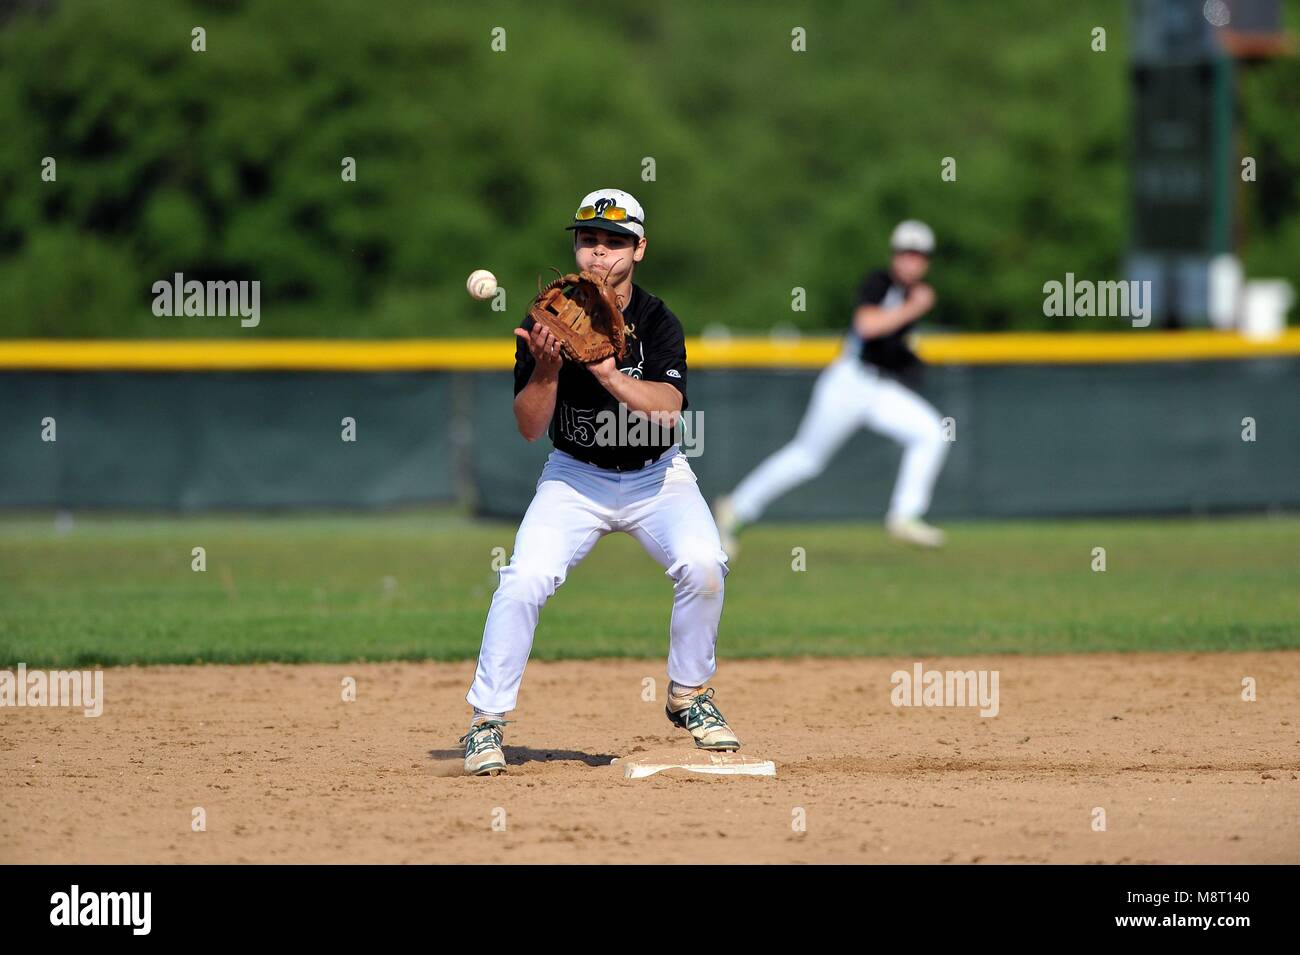 Second baseman taking a throw from his shortstop to retire a runner at second base before relaying on to first base. USA. Stock Photo